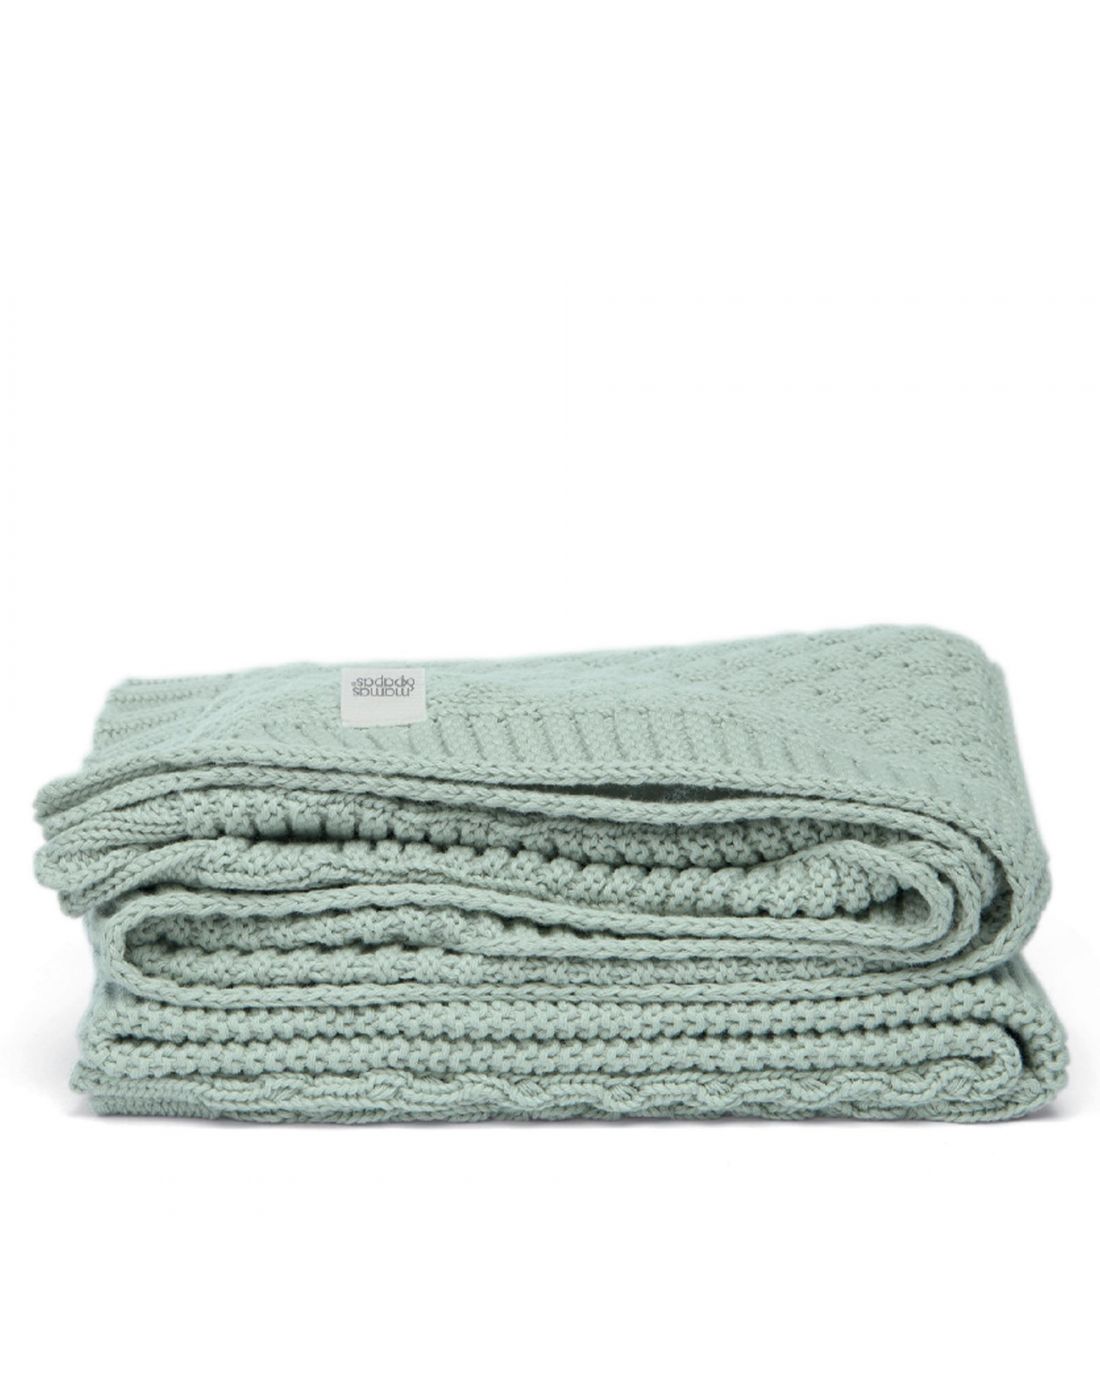 Mamas & Papas Knitted Blanket Welcome to the World Seedling Blue-green